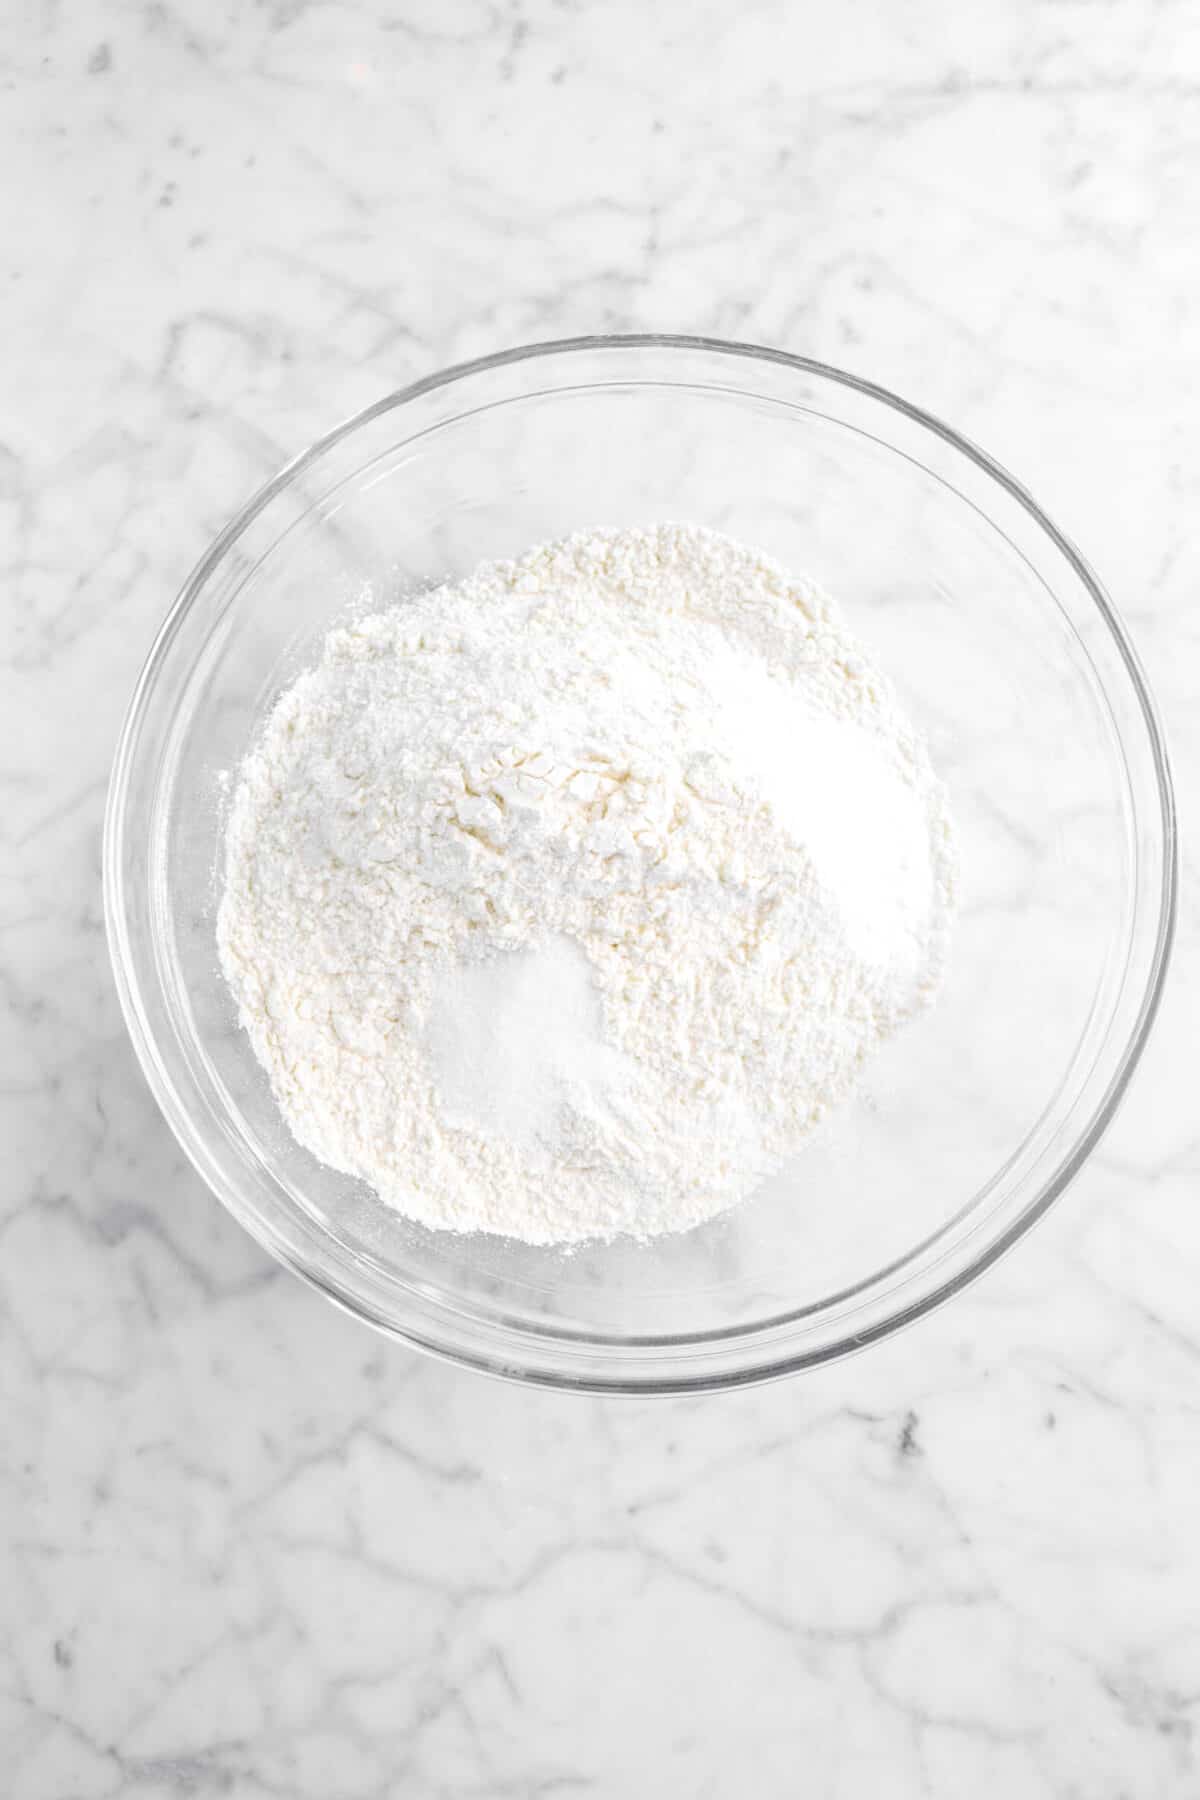 flour, salt, and baking soda in a glass bowl